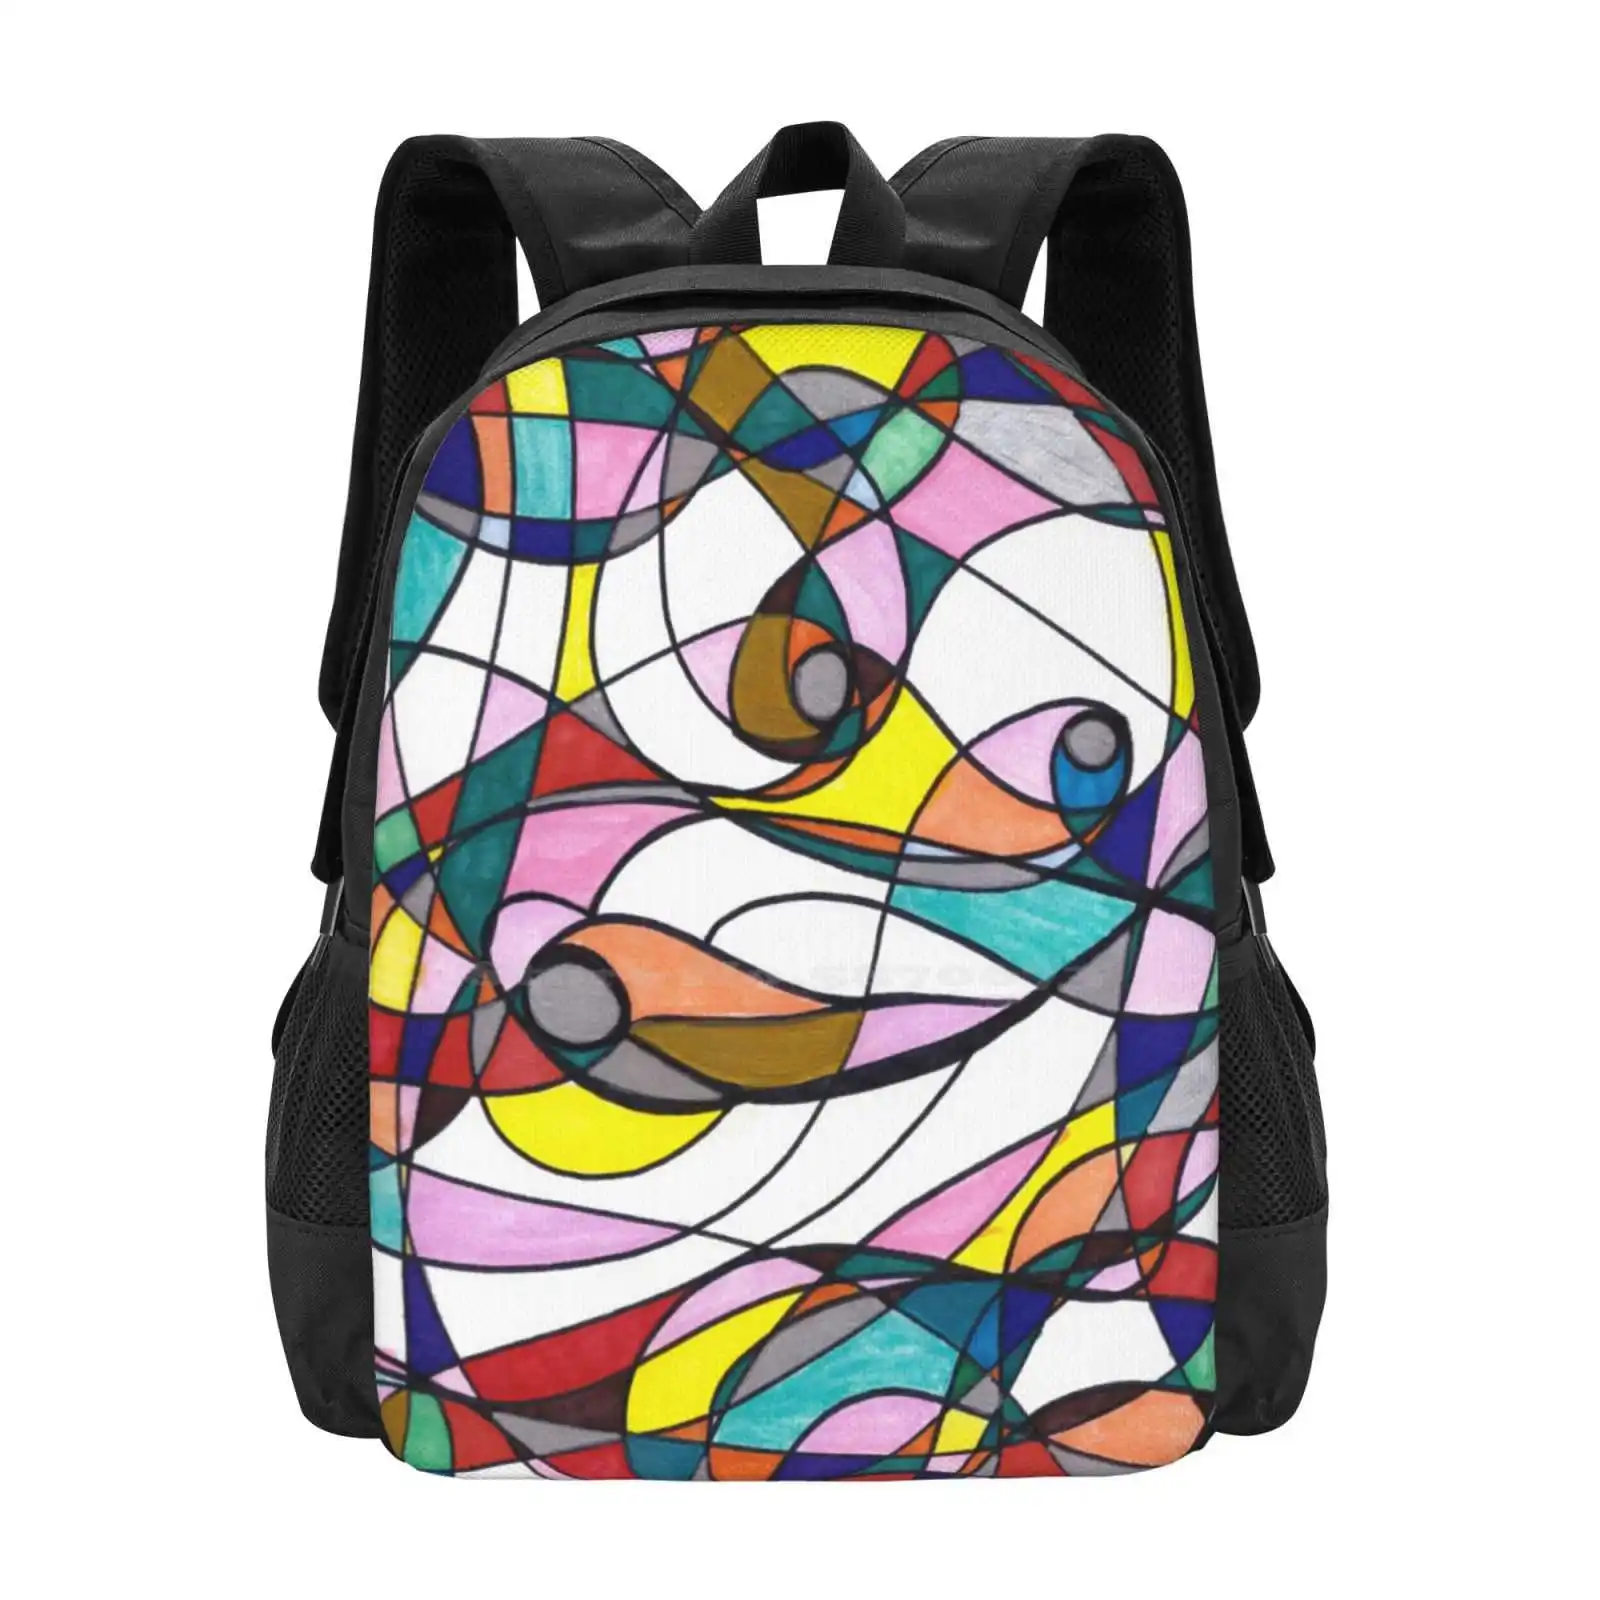 

Doodle Fun Teen College Student Backpack Pattern Design Bags Bright Funky Up Woman Eyes Fish Swirls Colours Graphic Geometric